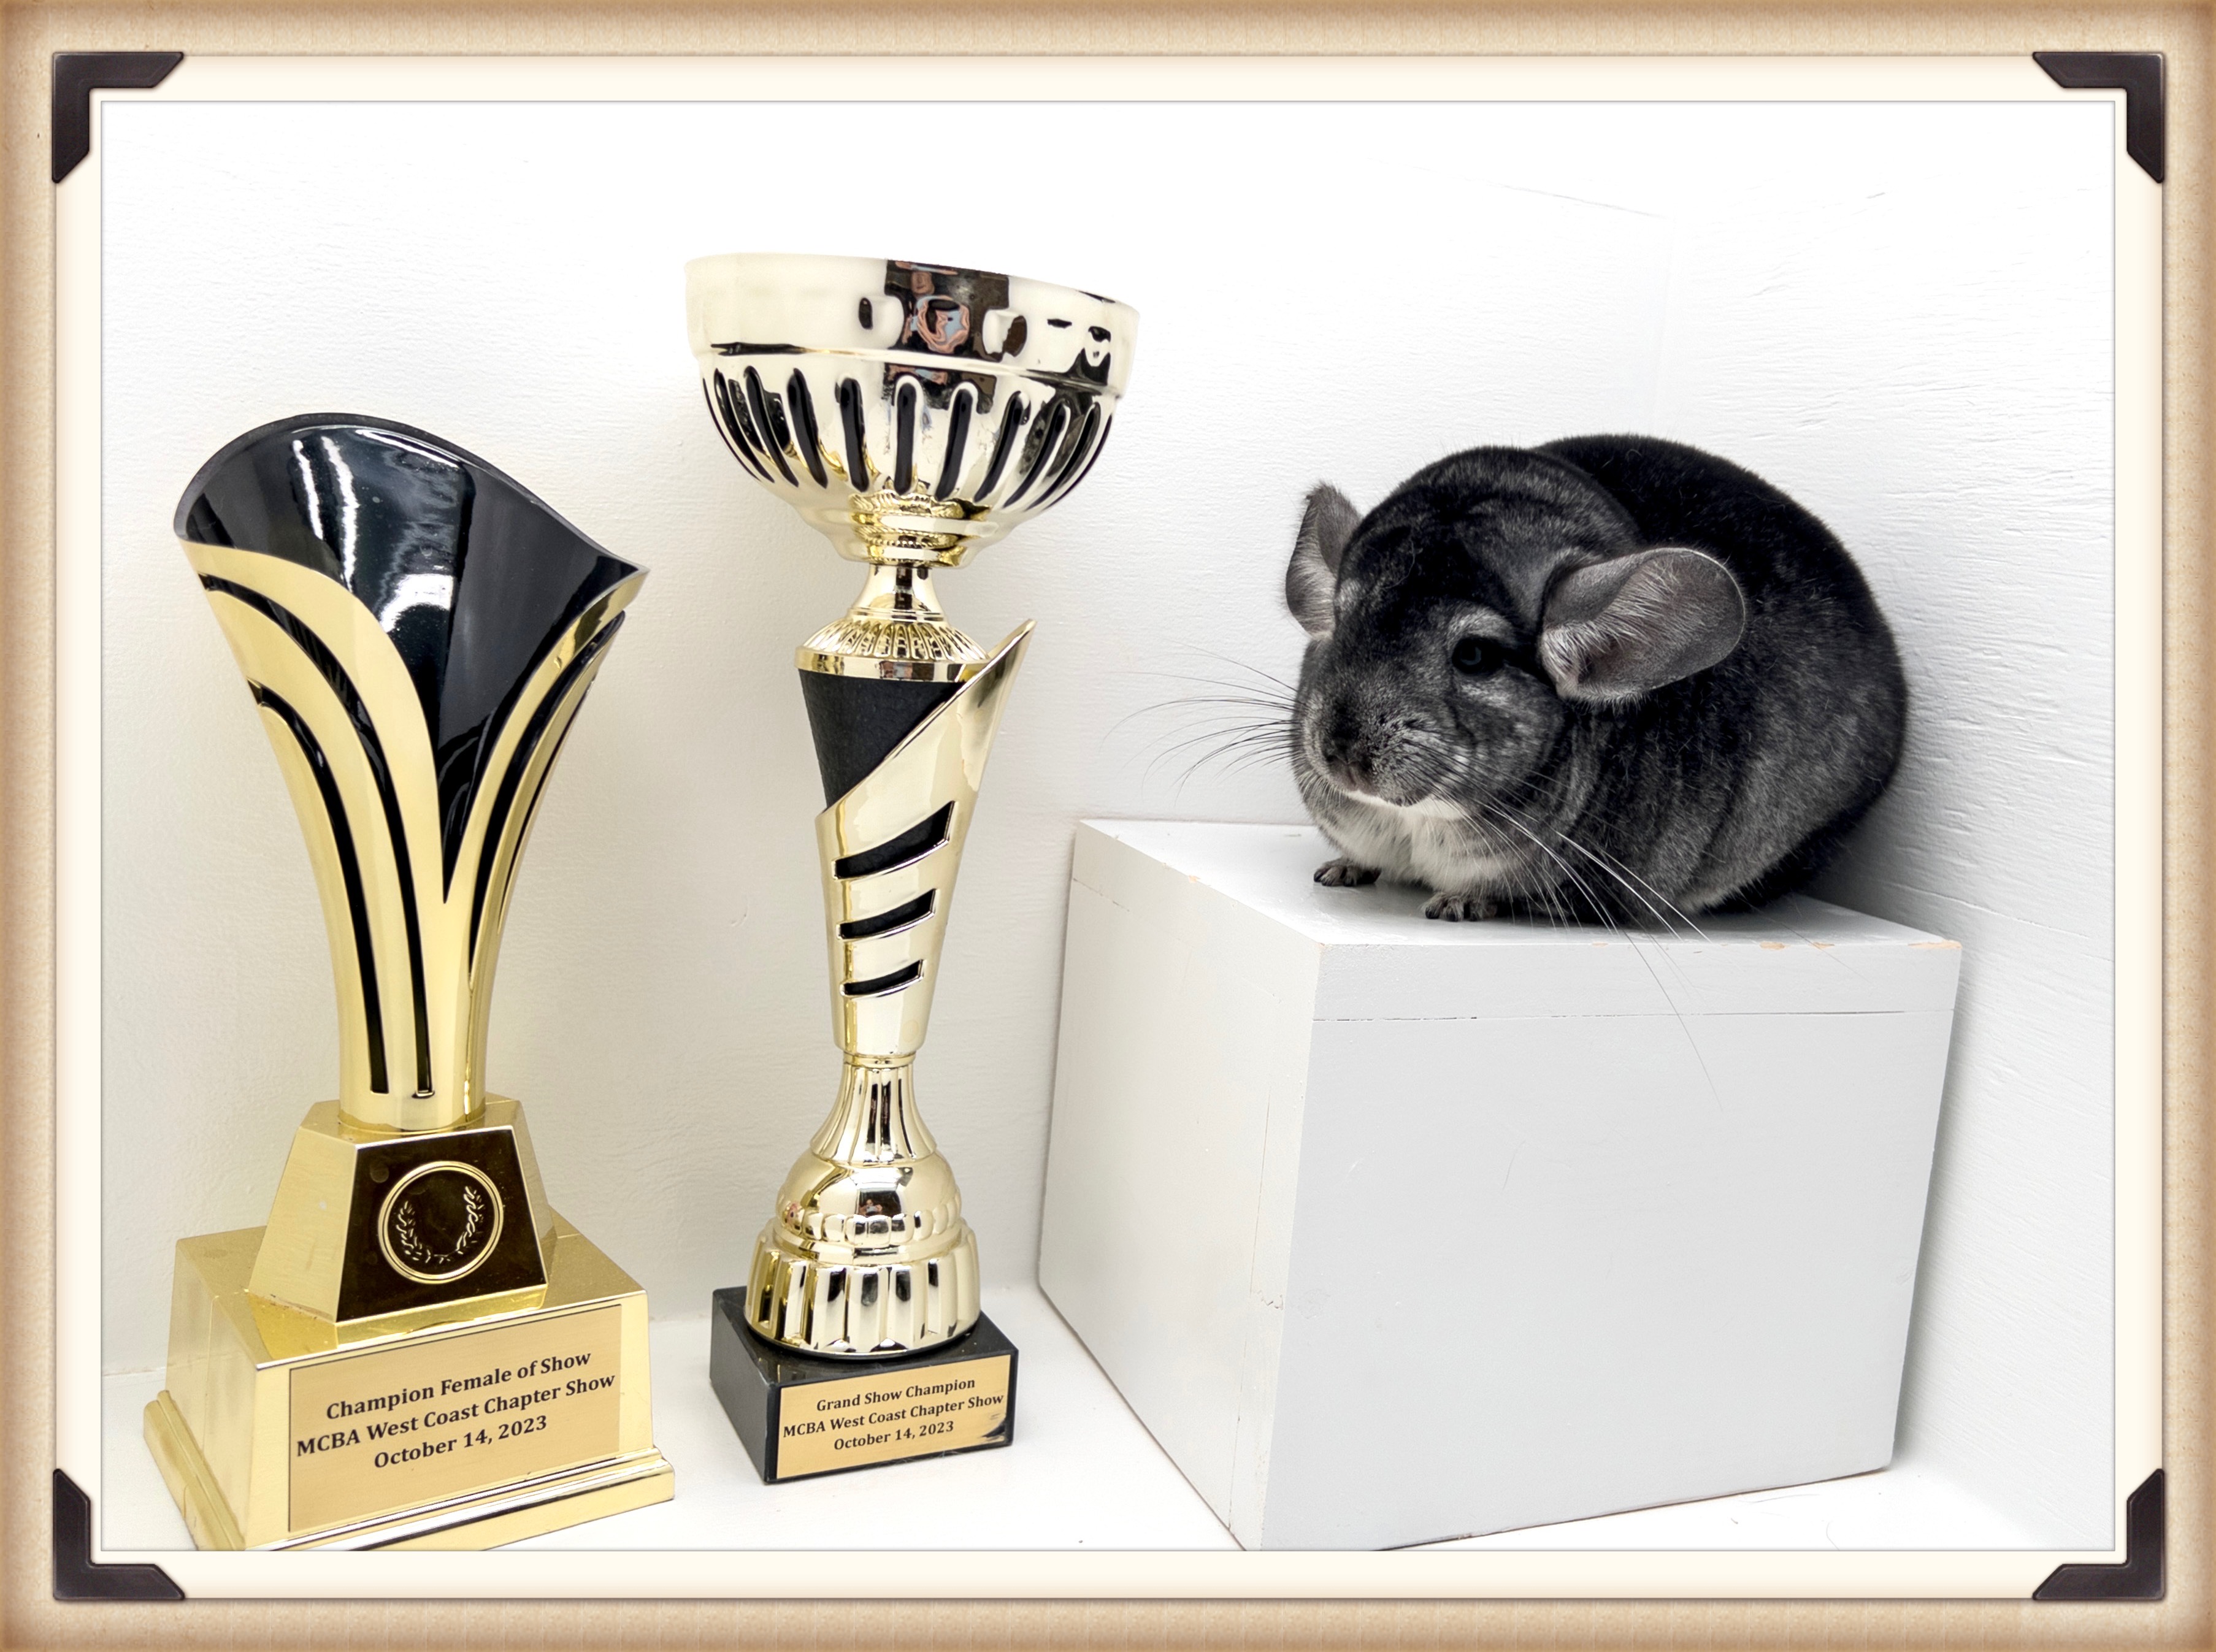 A reputable breeder ensures the health, well-being, and ethical treatment of chinchillas. Explore the principles and standards that set reputable breeders apart, emphasizing transparency, knowledge, passion, and ongoing support for both animals and owners.